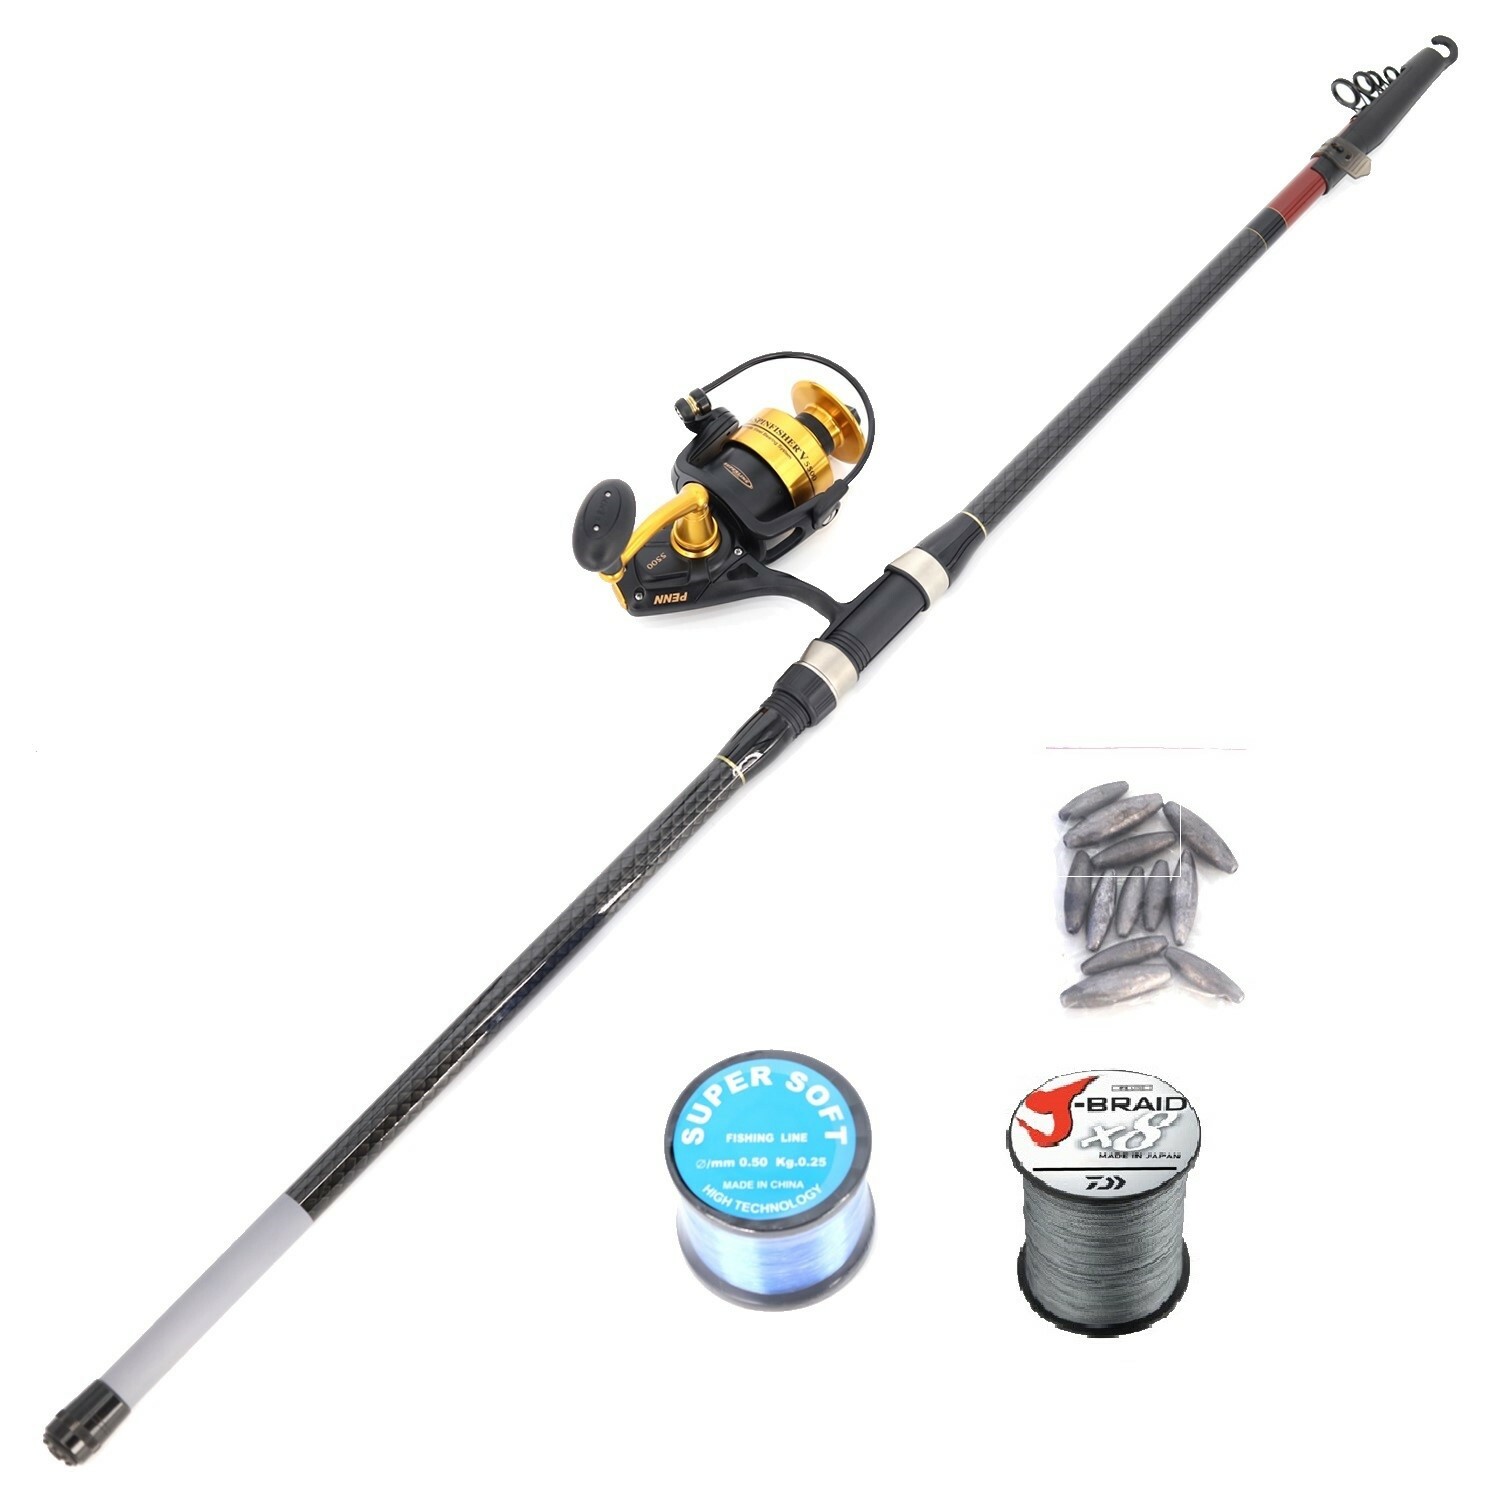 Shore Fishing (Pilot 3m and Penn V5500 including braid and mono line with rigs and sinkers and snap swivels) Combo